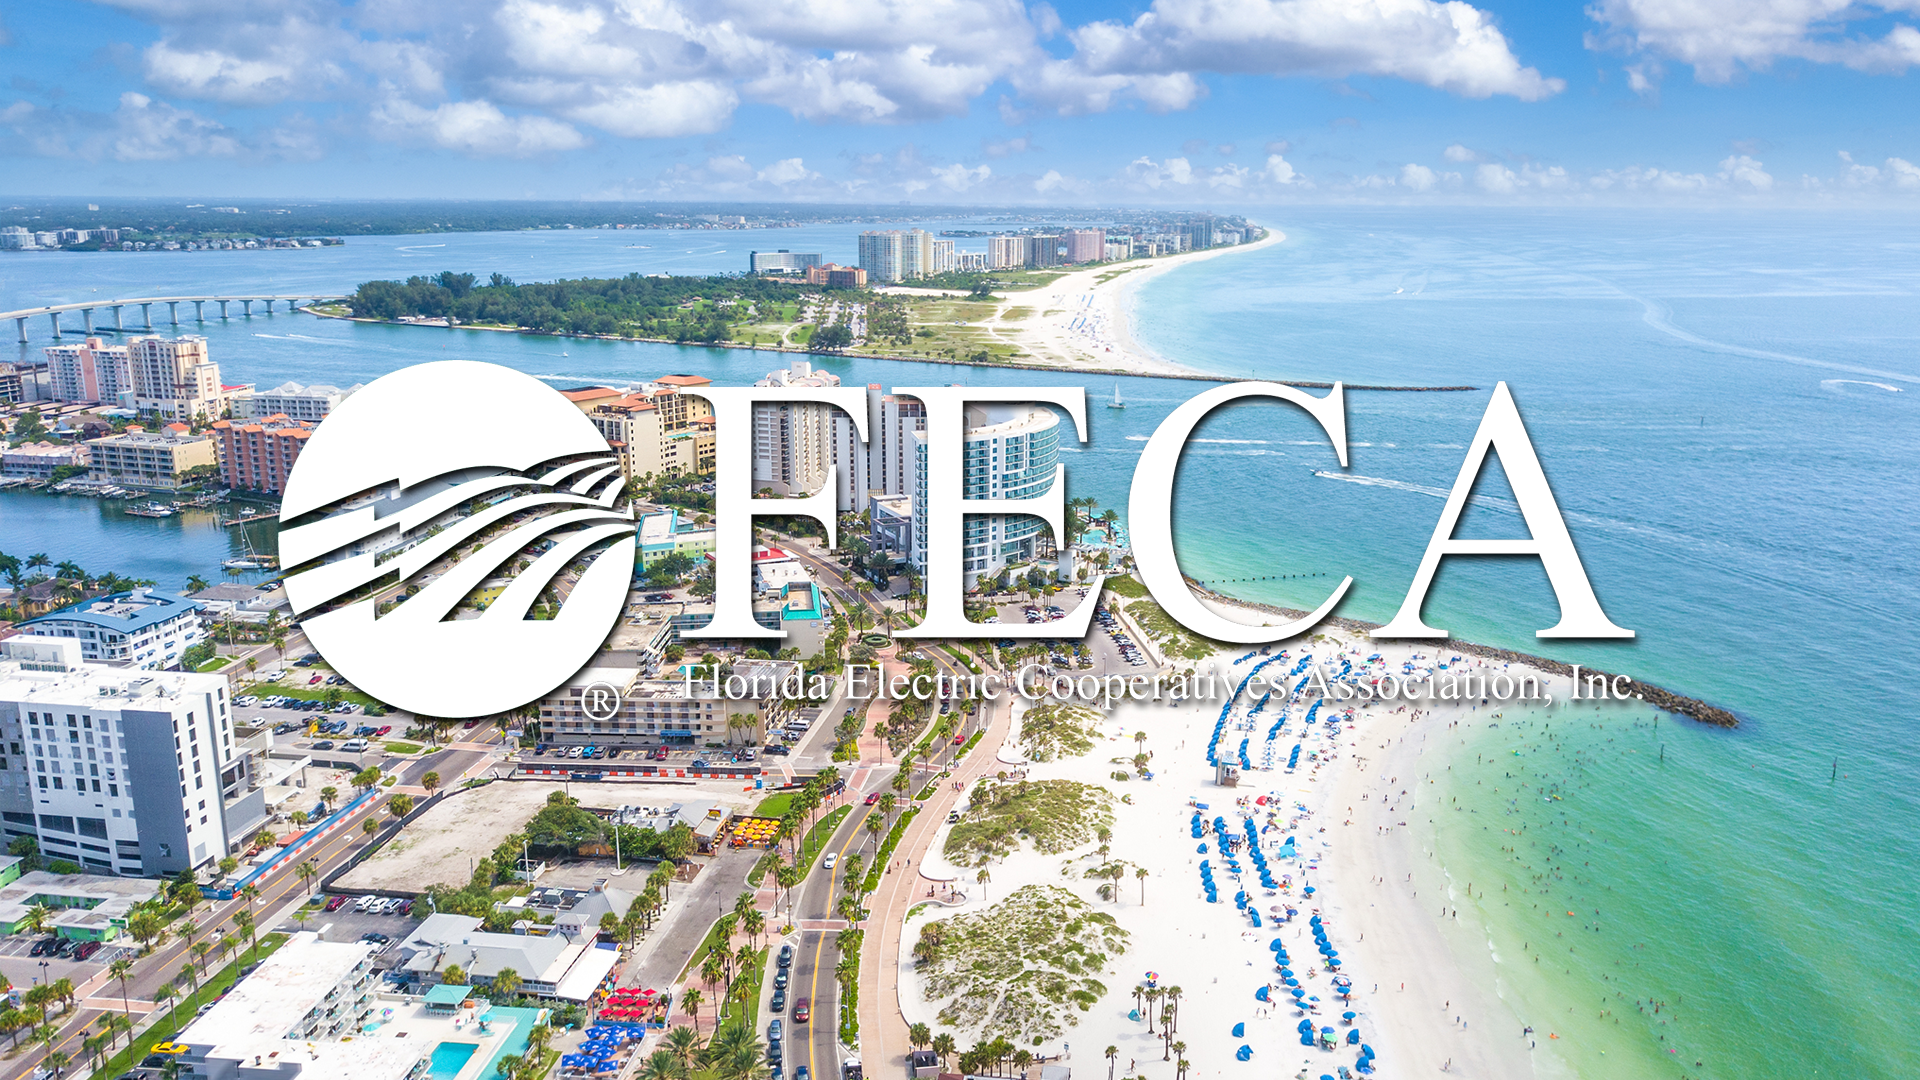 Florida Electric Cooperative Association Engineers Conference